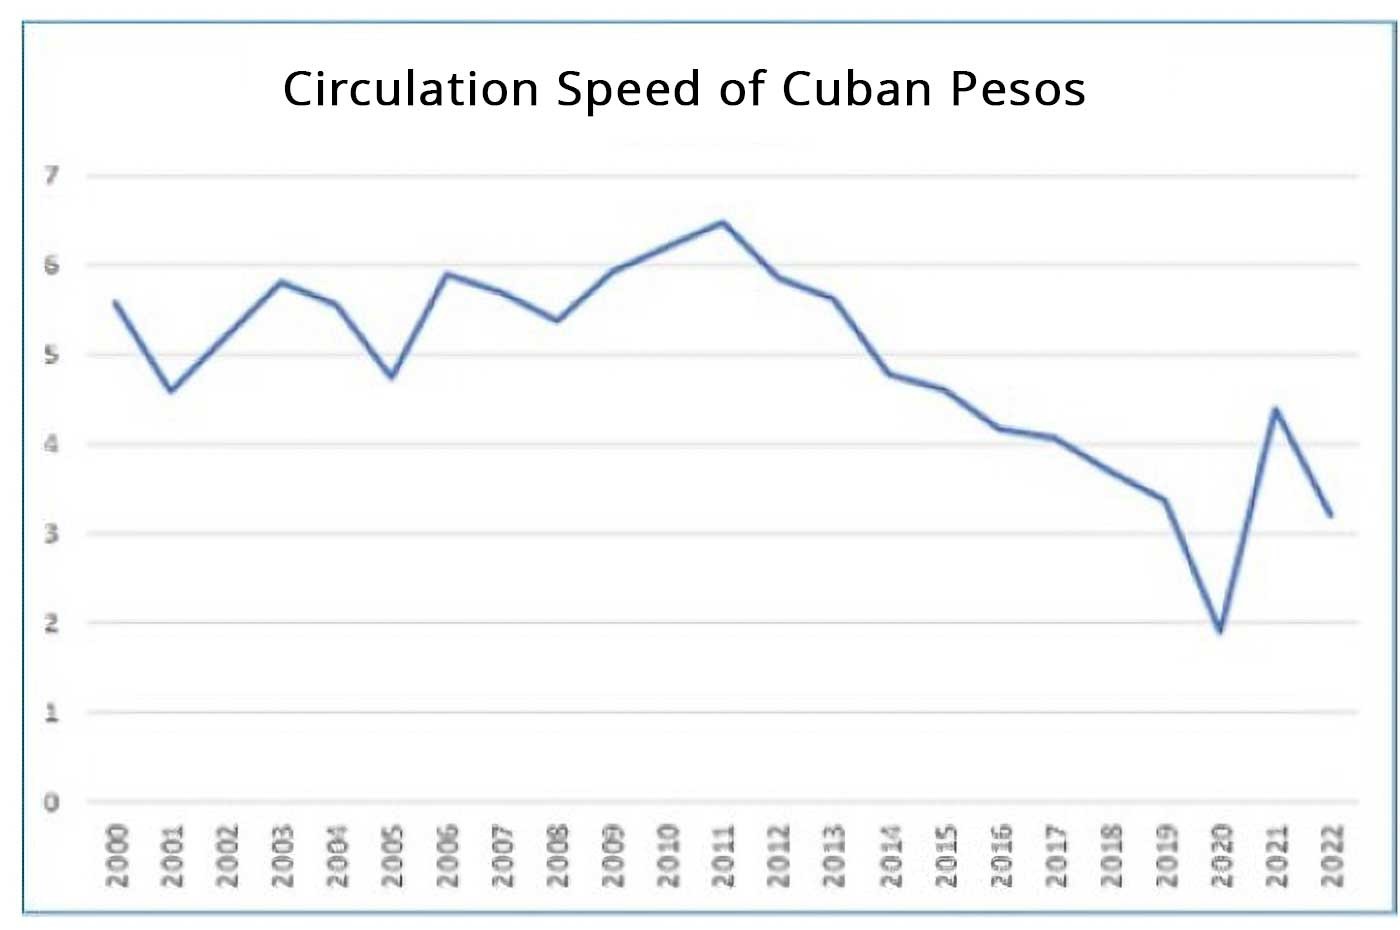 Graph that demonstrates the speed of circulation of Cuban pesos from the year 2000 to 2022